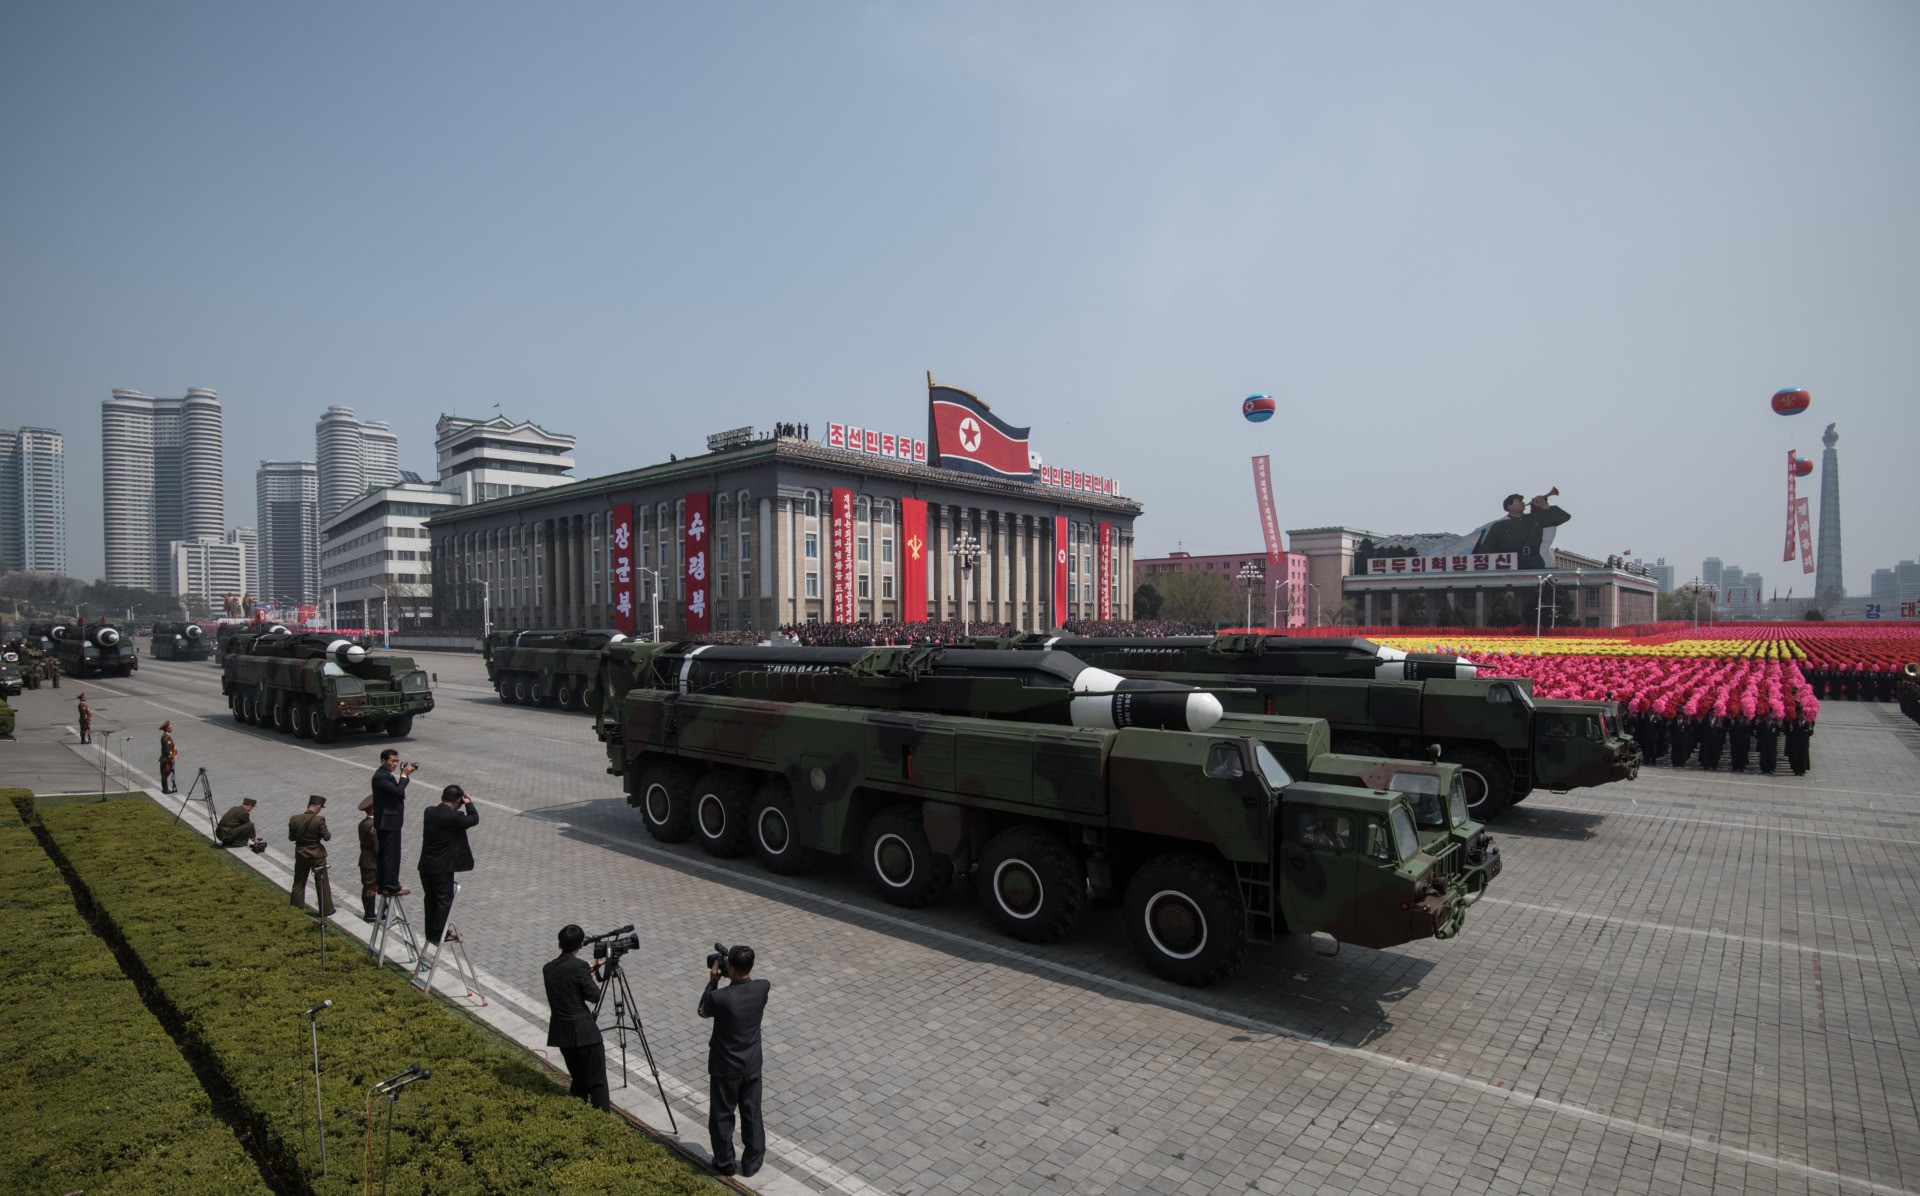 An unidentified missile and mobile launcher makes its way through Kim Il-Sung square during a military parade marking the 105th anniversary of the birth of late North Korean leader Kim Il-Sung in Pyongyang on April 15, 2017. North Korean leader Kim Jong-Un on April 15 saluted as ranks of goose-stepping soldiers followed by tanks and other military hardware paraded in Pyongyang for a show of strength with tensions mounting over his nuclear ambitions. / AFP PHOTO / Ed JONES (Photo credit should read ED JONES/AFP via Getty Images)